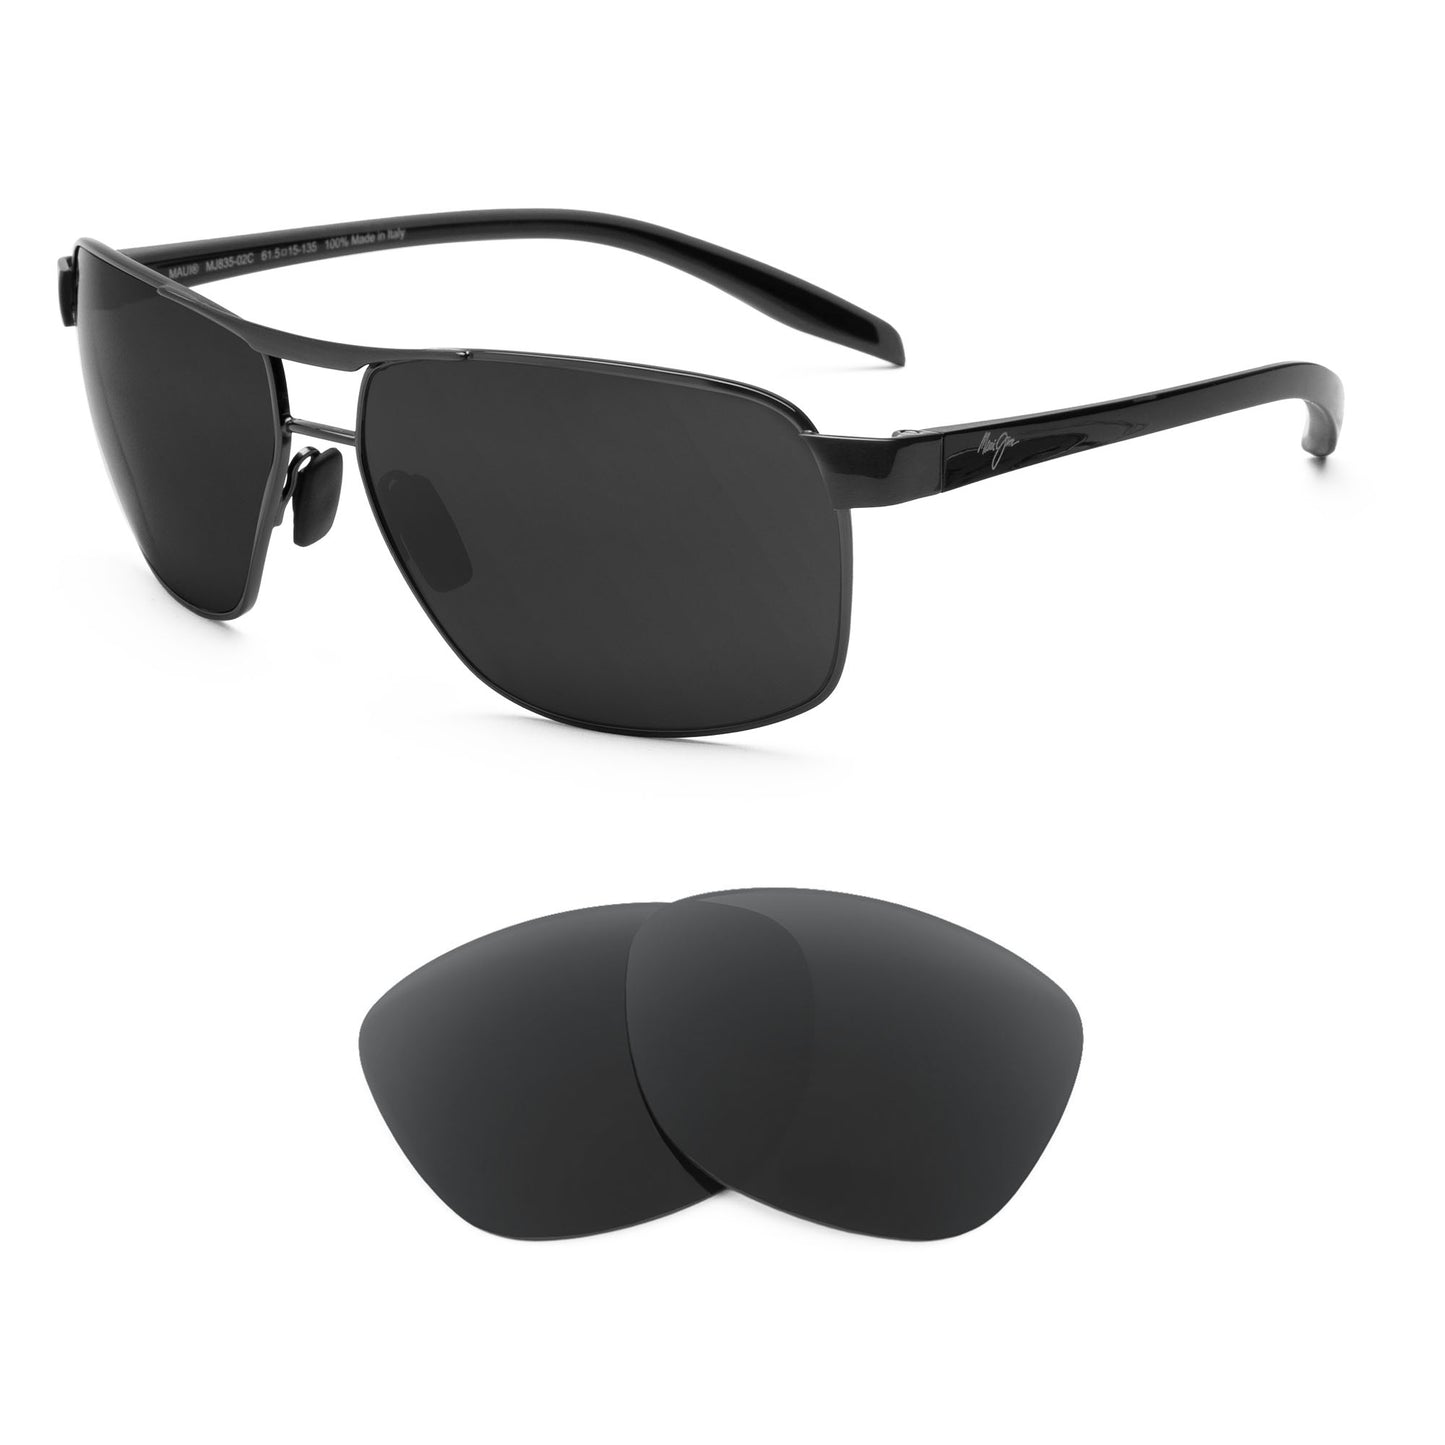 Maui Jim The Bird MJ835 sunglasses with replacement lenses